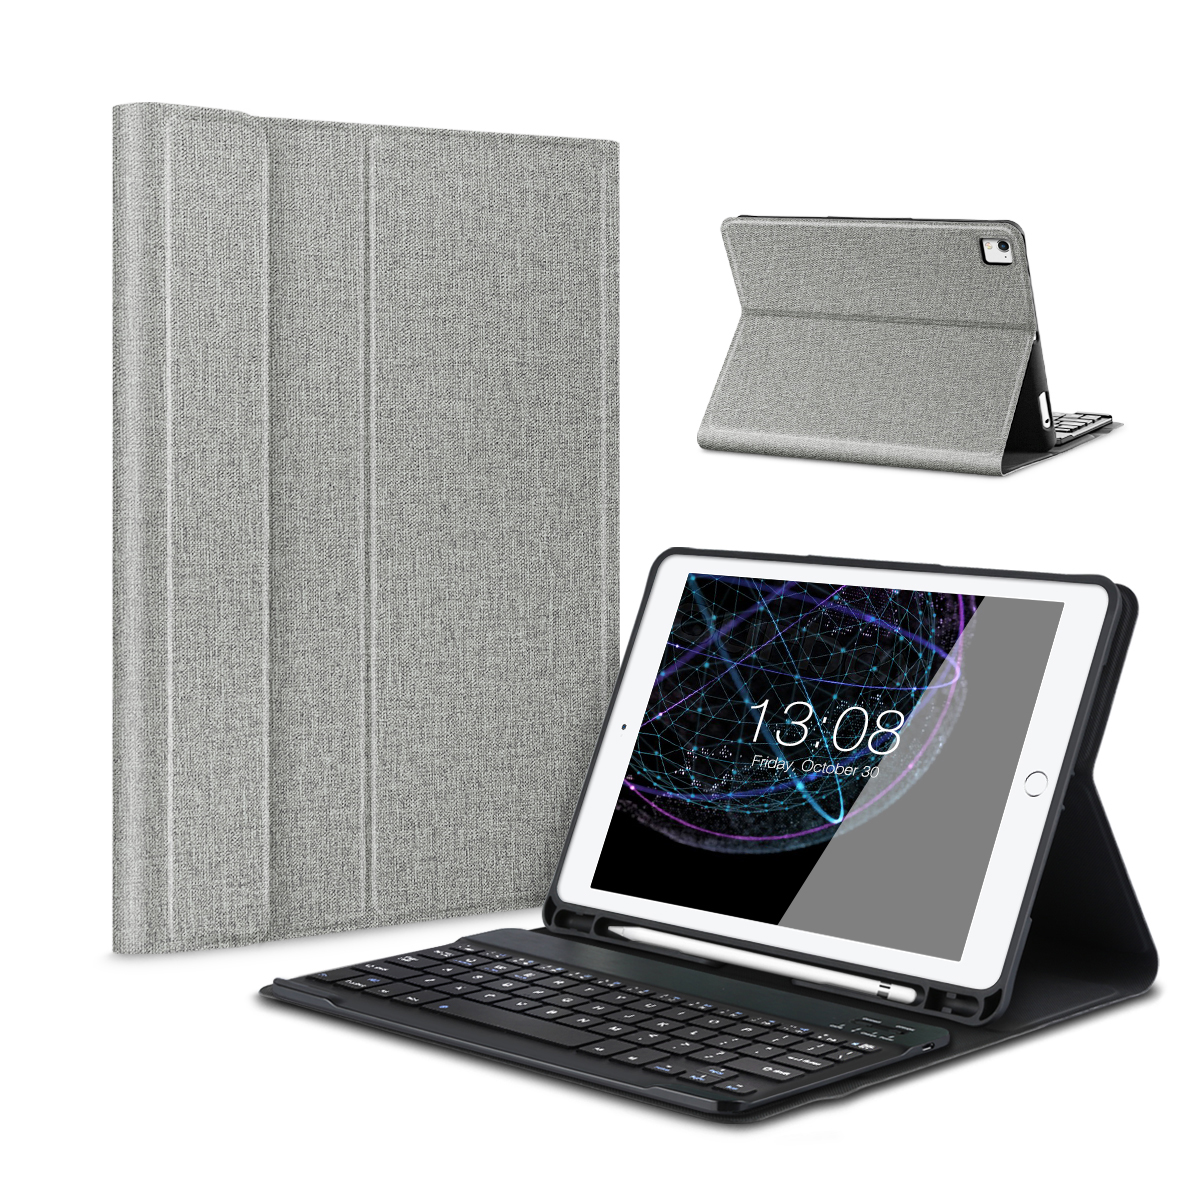 iPad 9.7 Keyboard Case for iPad 2018 (6th Gen)- iPad 2017 (5th Gen)- iPad Pro 9.7- iPad Air 2 1, Slim Detachable Bluetooth Keyboard with Folio Stand Multi-Angle Viewing Cover & Pencil Holder, Gray - image 1 of 5